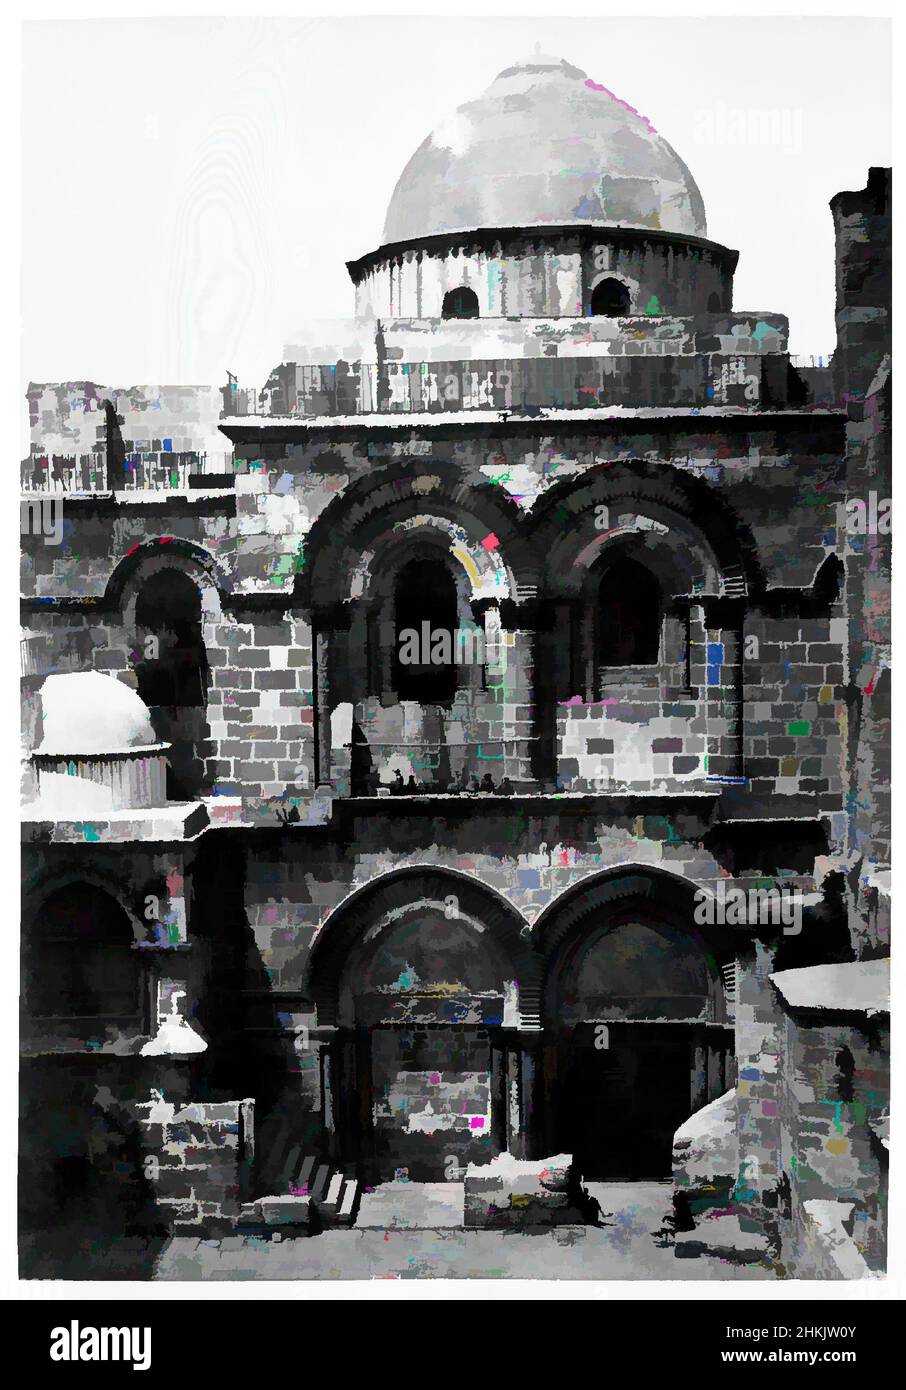 Art inspired by Entrance, Church of the Holy Sepulchre, Jerusalem, Francis Frith, British, 1822-1898, Gelatin silver photograph, ca. 1875-1880, Classic works modernized by Artotop with a splash of modernity. Shapes, color and value, eye-catching visual impact on art. Emotions through freedom of artworks in a contemporary way. A timeless message pursuing a wildly creative new direction. Artists turning to the digital medium and creating the Artotop NFT Stock Photo